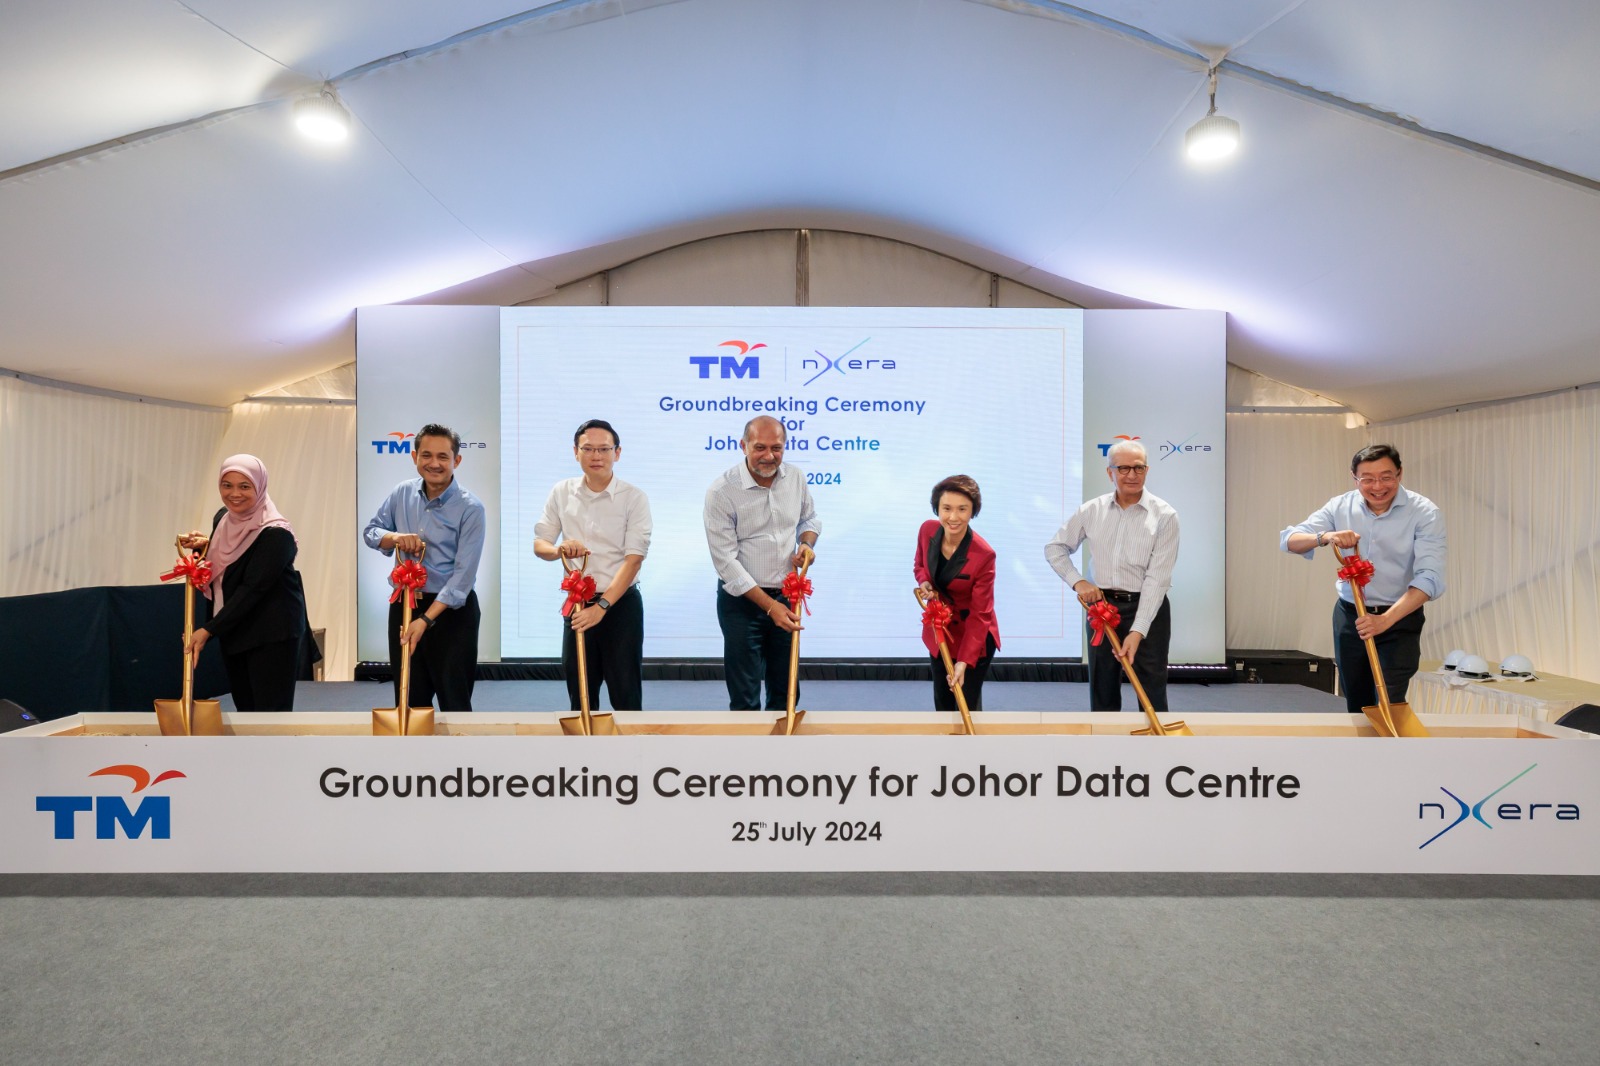 TM AND SINGTEL’S NXERA BREAK GROUND FOR SUSTAINABLE, HYPER-CONNECTED DATA CENTRE CAMPUS IN JOHOR